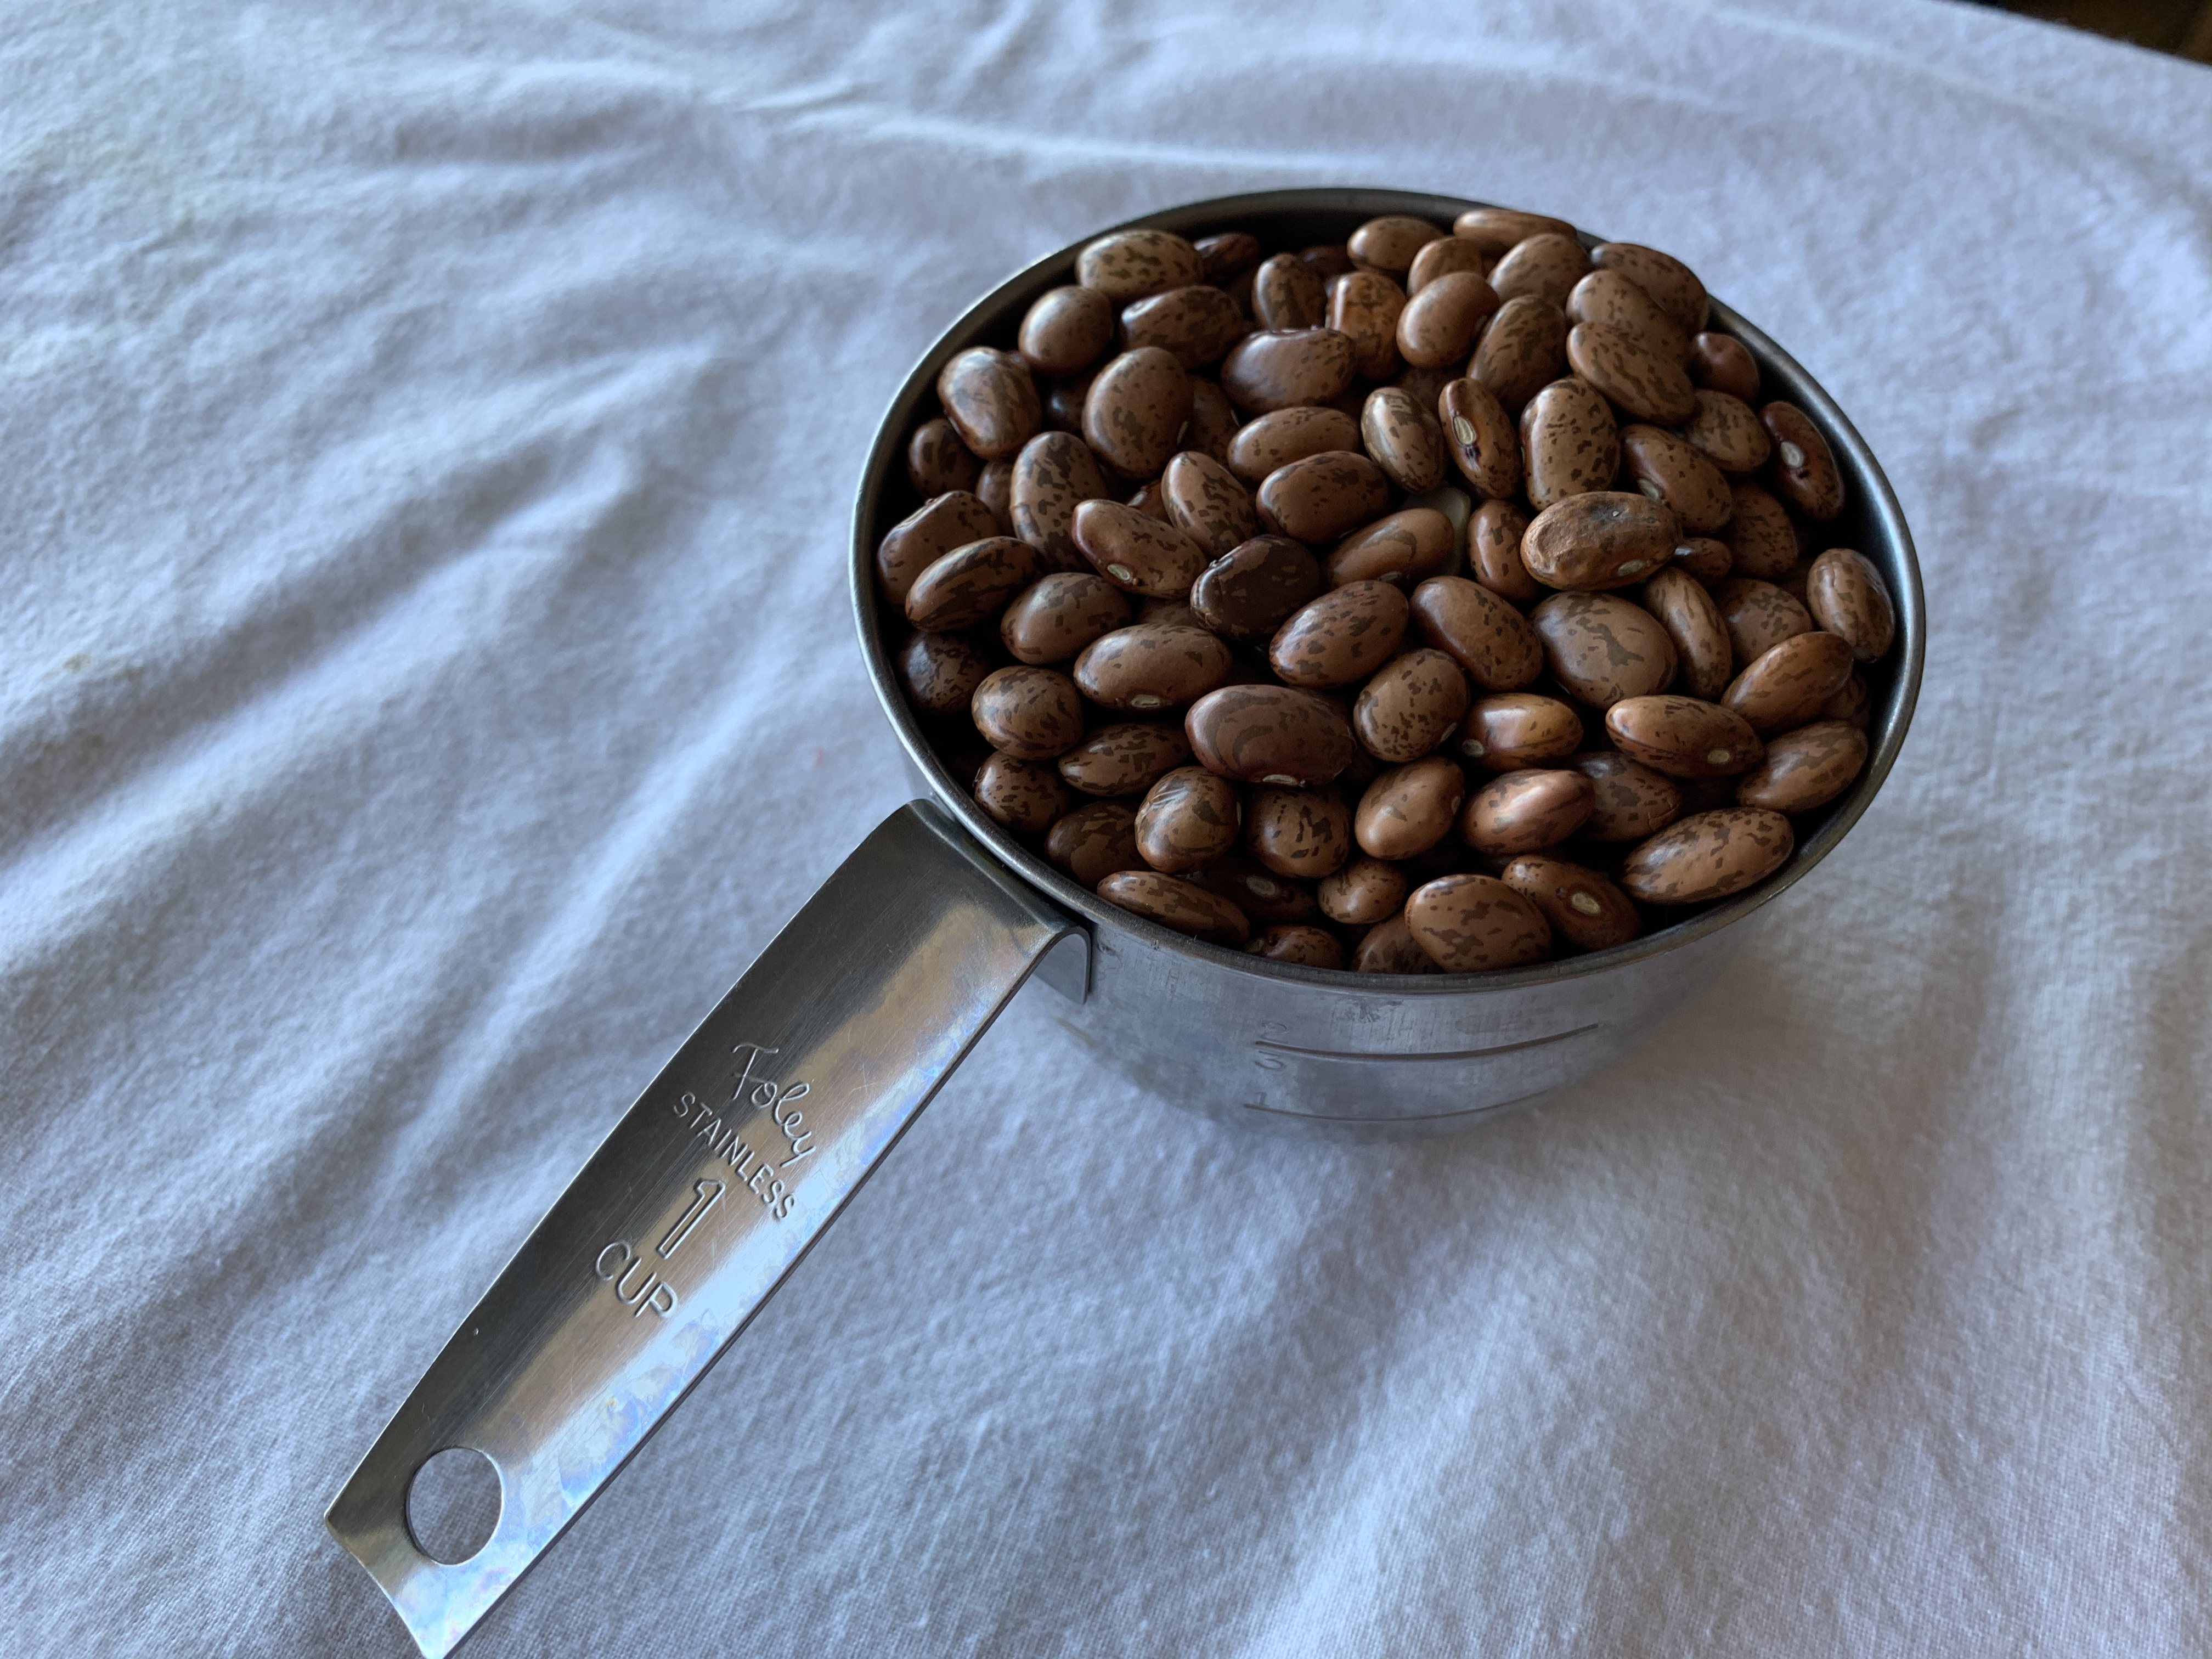 1 cup measuring cup filled with beans.